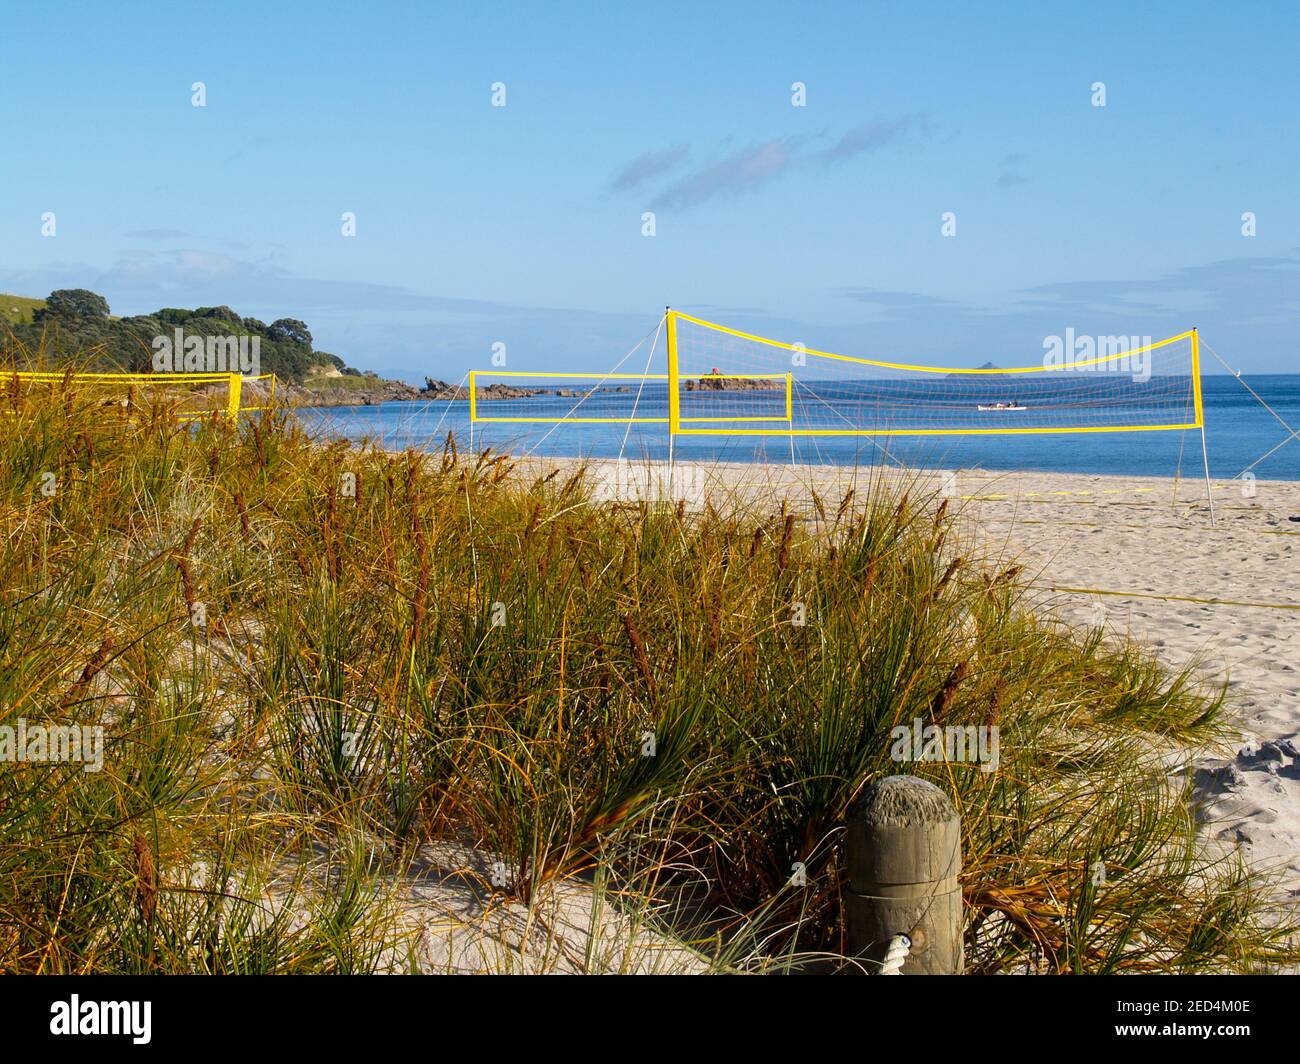 Yellow beach volleyball nets erected for use with no players yet on Mount Maunganui Main beach with beach grass in foreground. Stock Photo